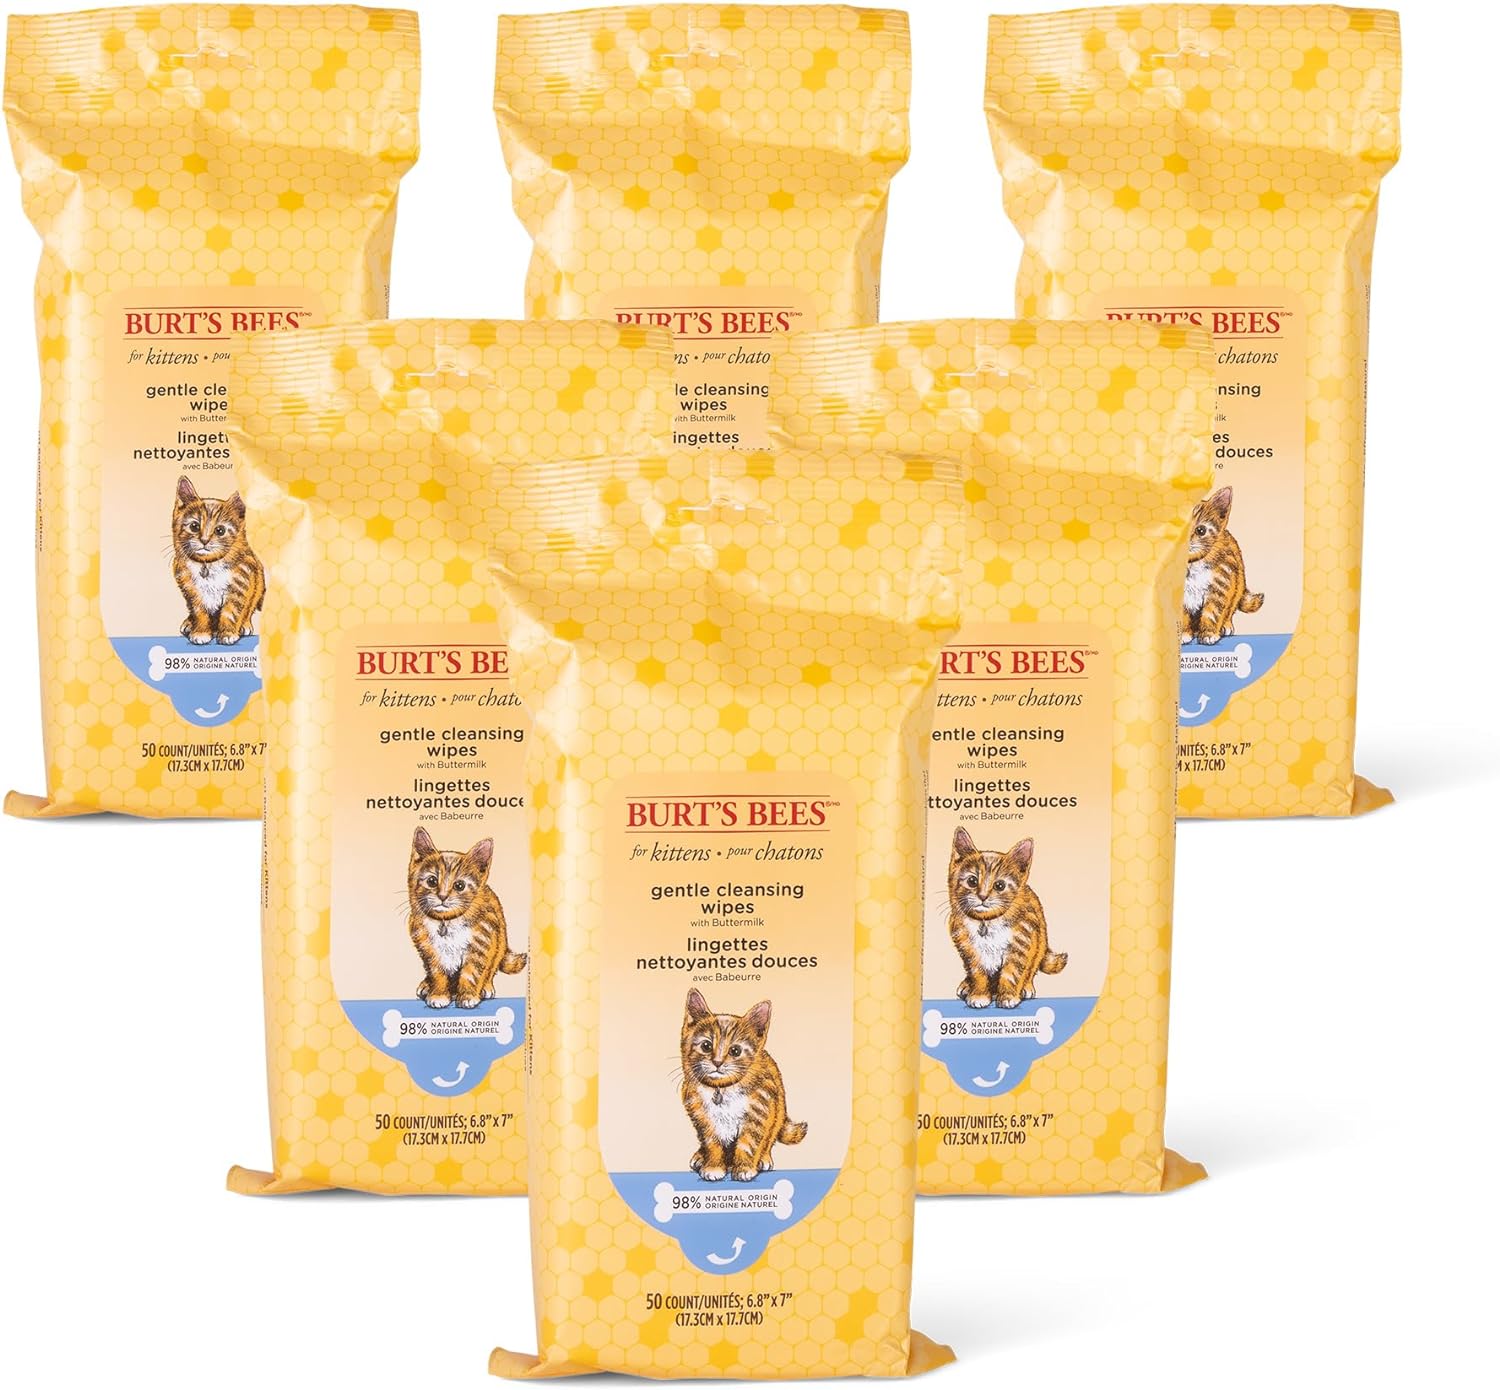 Burt's Bees for Pets Kitten Wipes Wipes | Kitten Wipes for All Cats, Safe for Kittens | Cruelty Free, Sulfate & Paraben Free, pH Balanced for Cats - Made in USA, 50 Count - 6 Pack